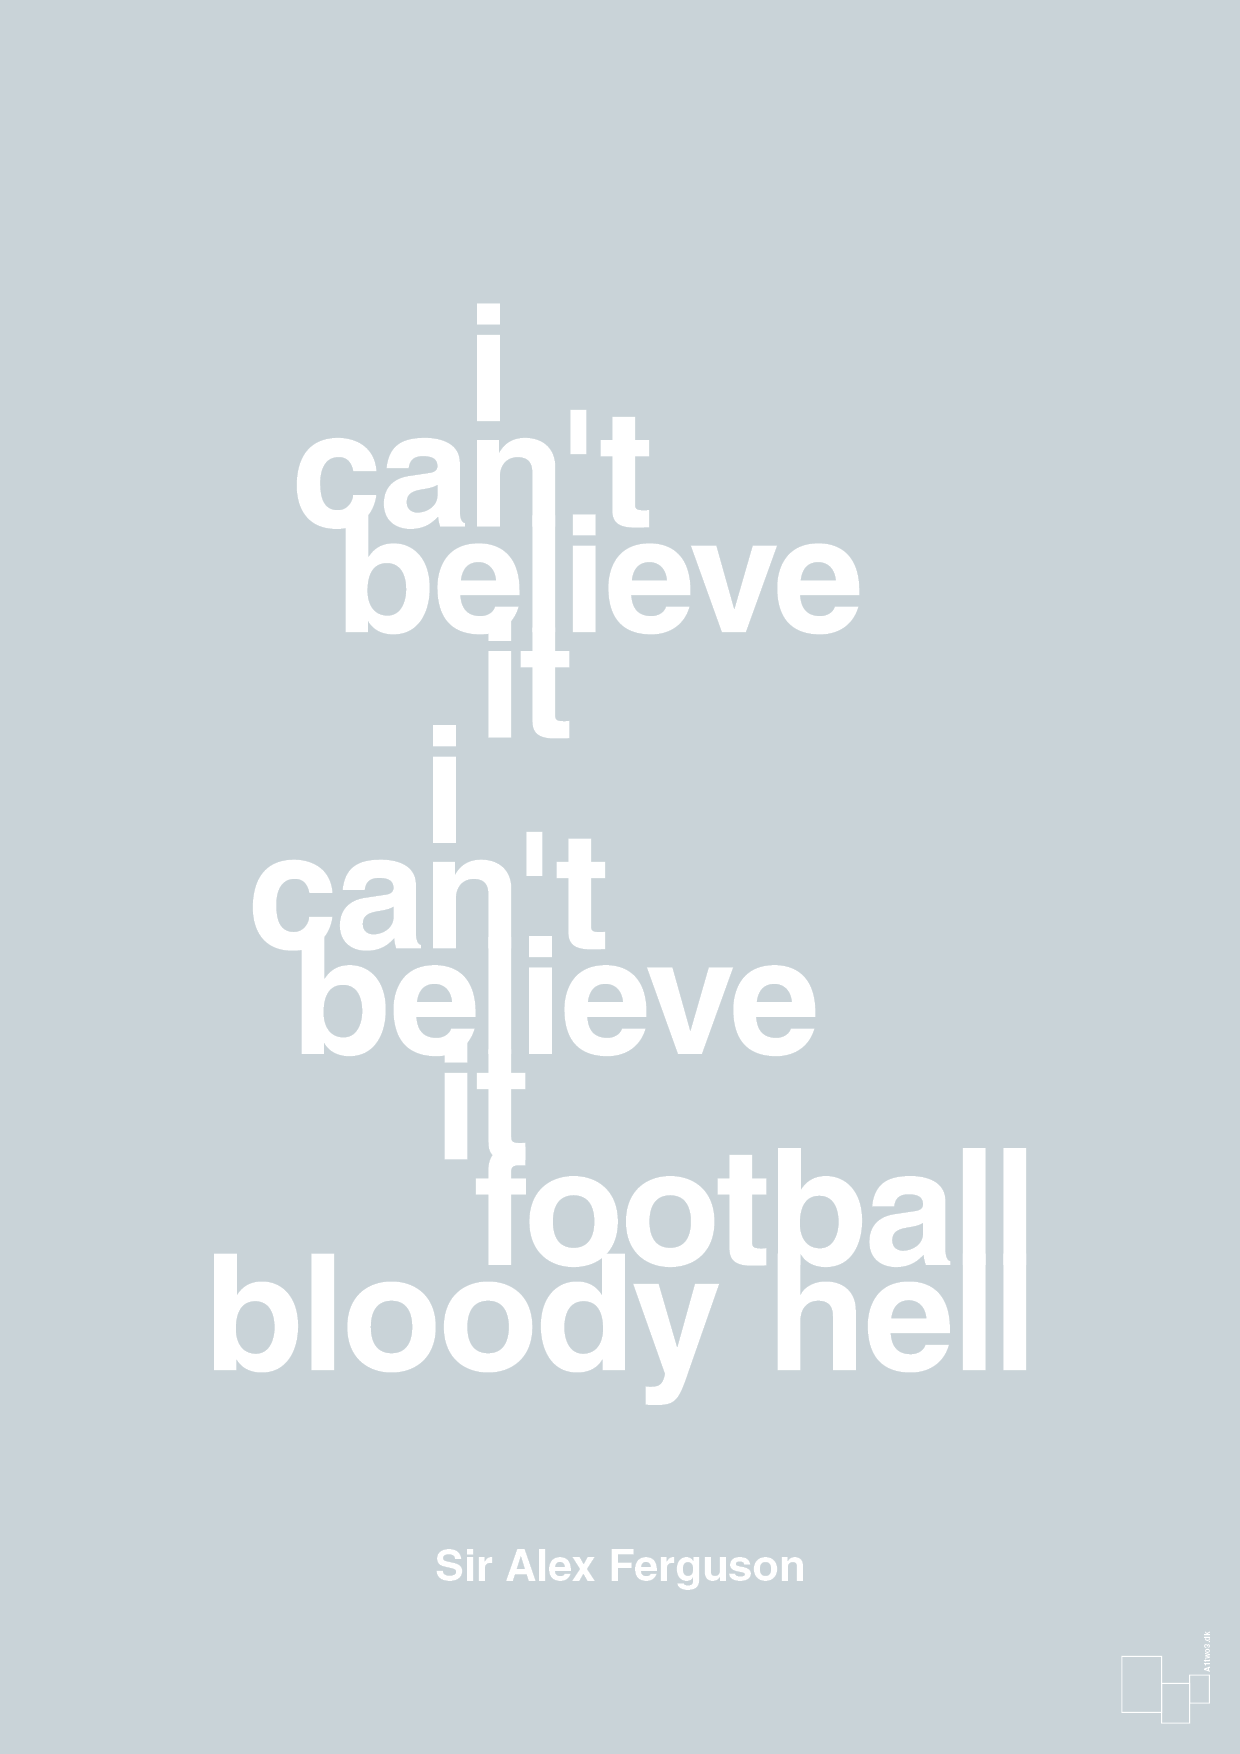 i can't believe it i can't believe it football bloody hell - Plakat med Citater i Light Drizzle